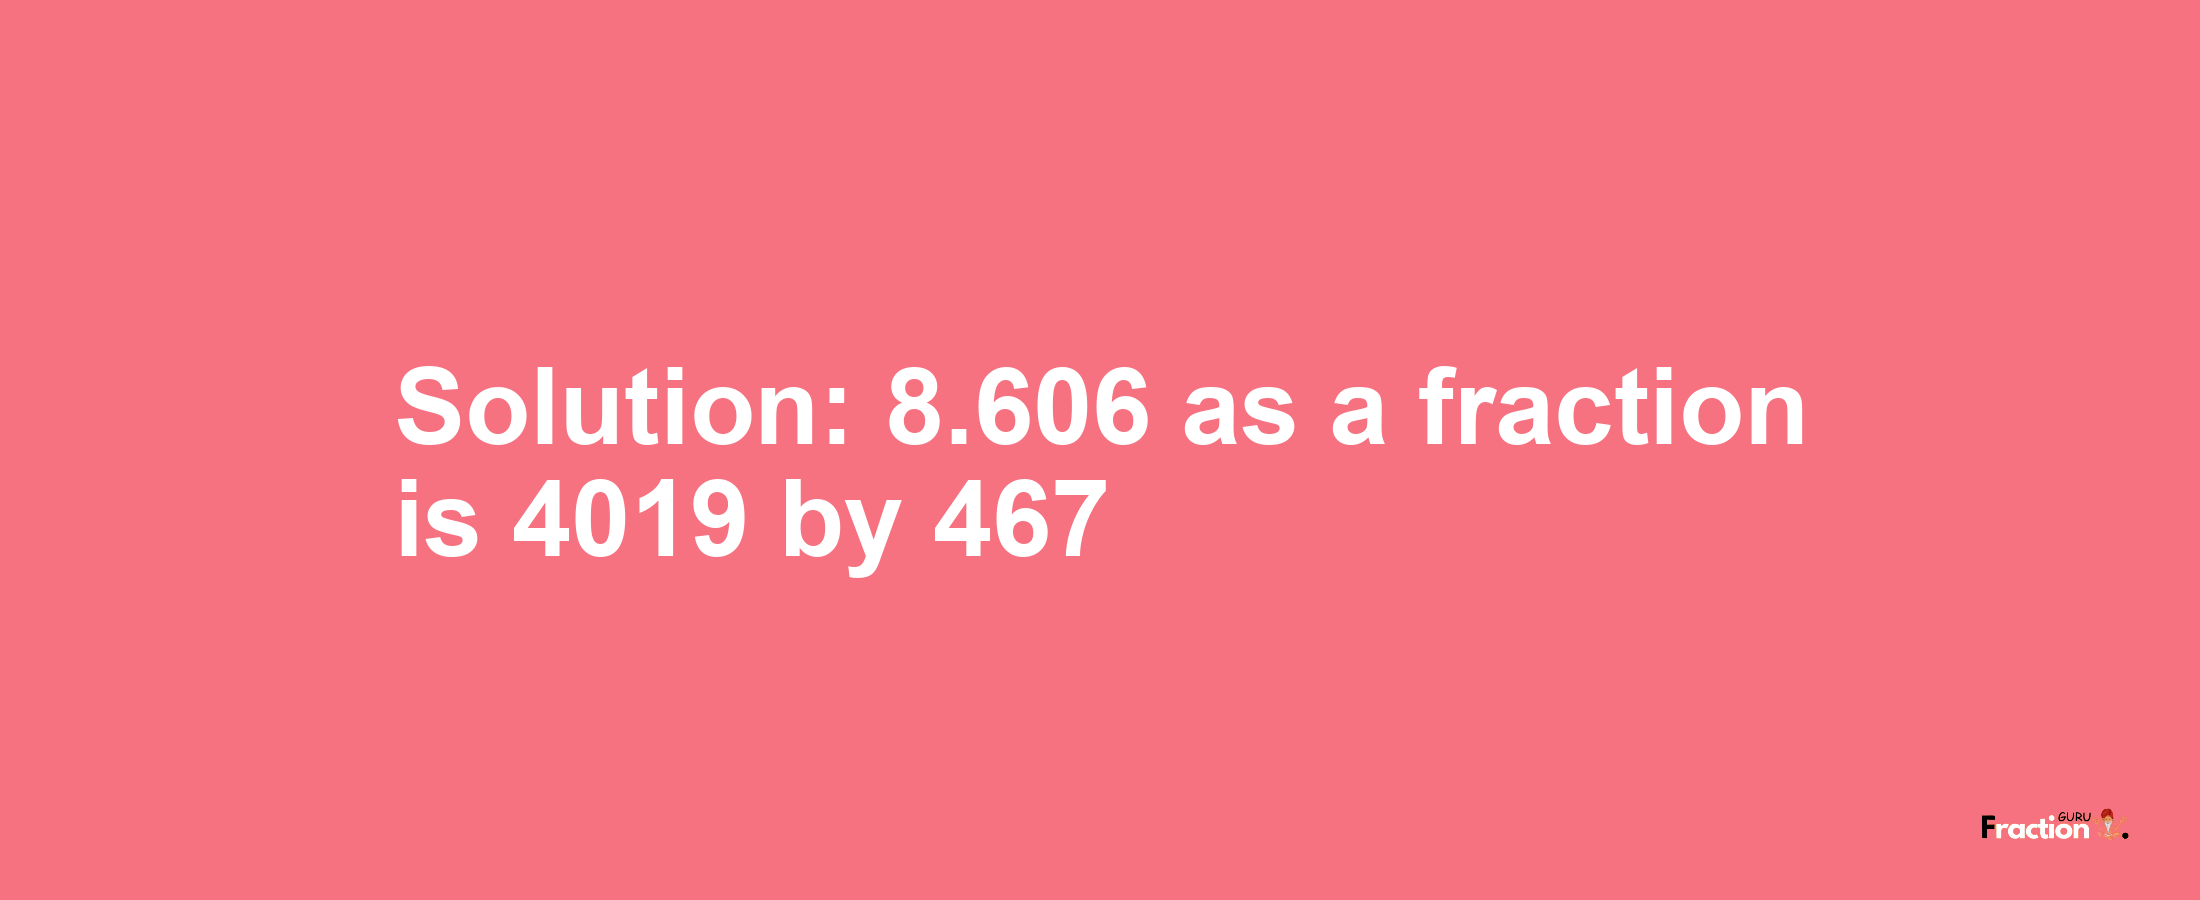 Solution:8.606 as a fraction is 4019/467